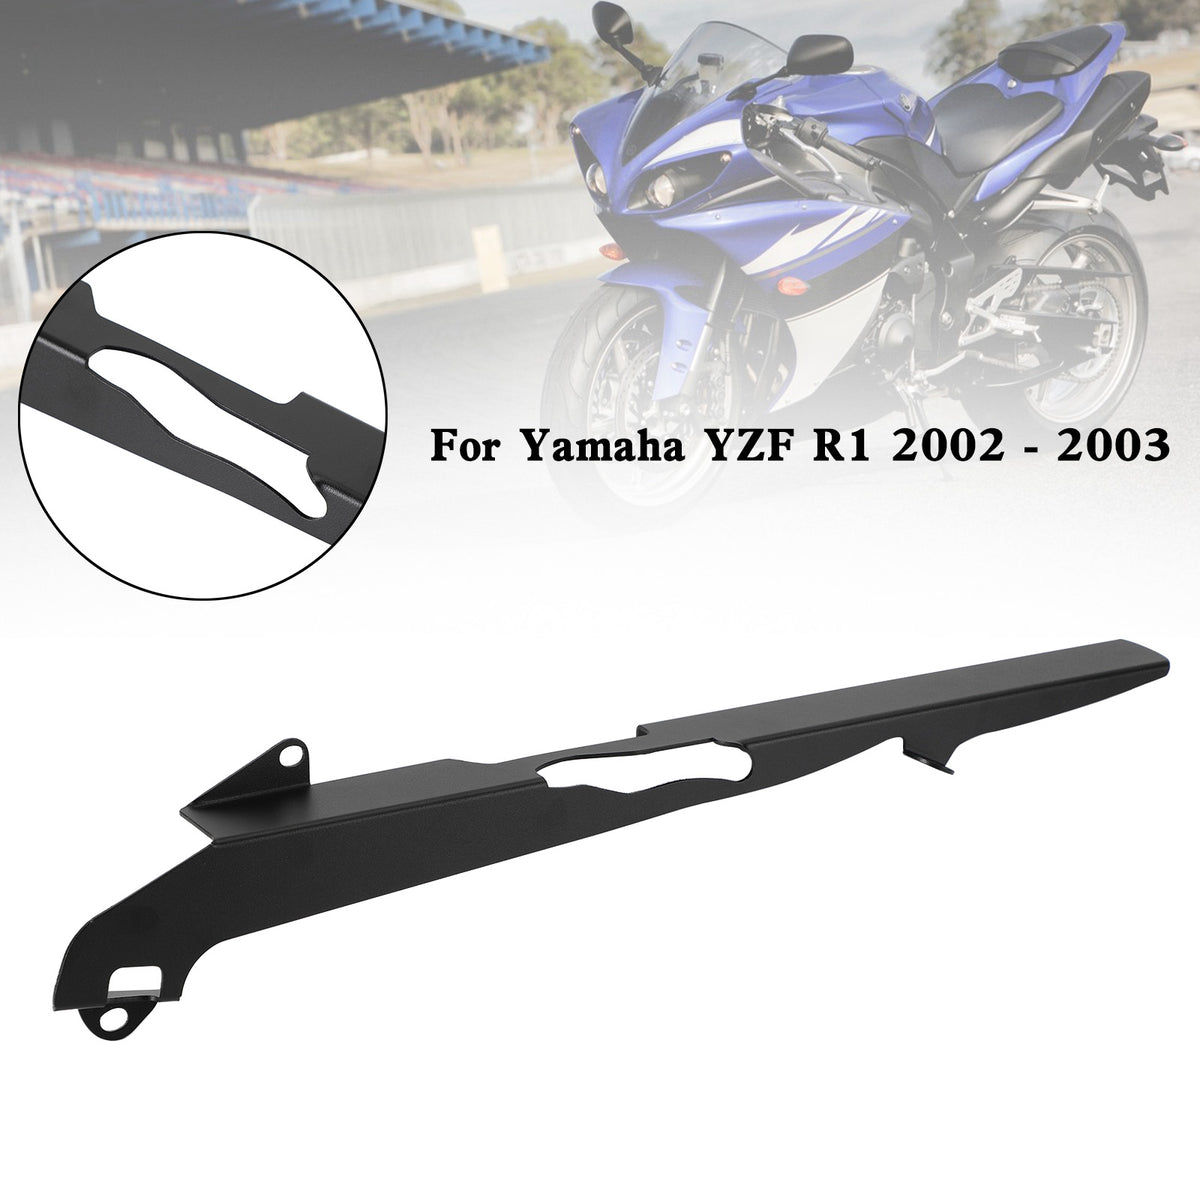 Rear Sprocket Chain Guard Protector Cover For Yamaha YZF R1 2002 2003 Generic